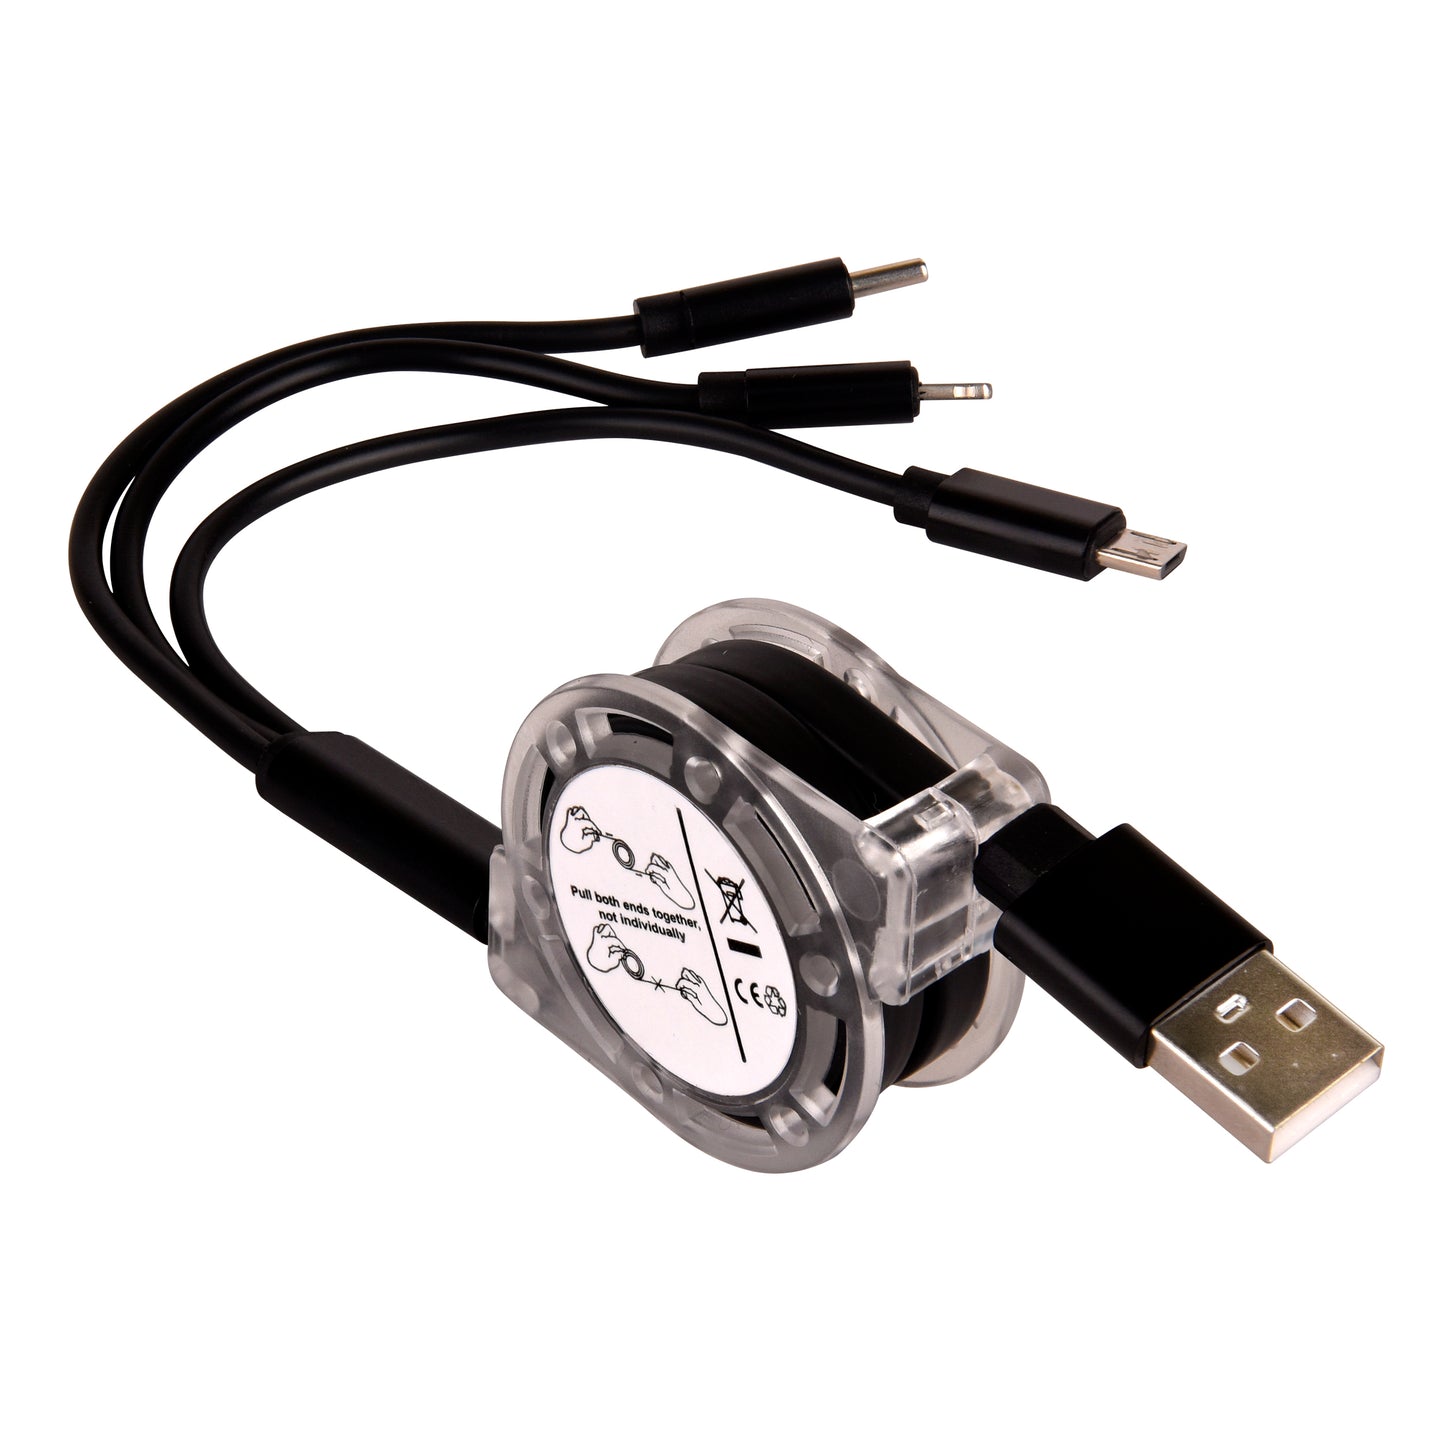 Yo-Yo charging cable 3in1 - For Office Use, Personal Use, or Corporate Gifting HK2528